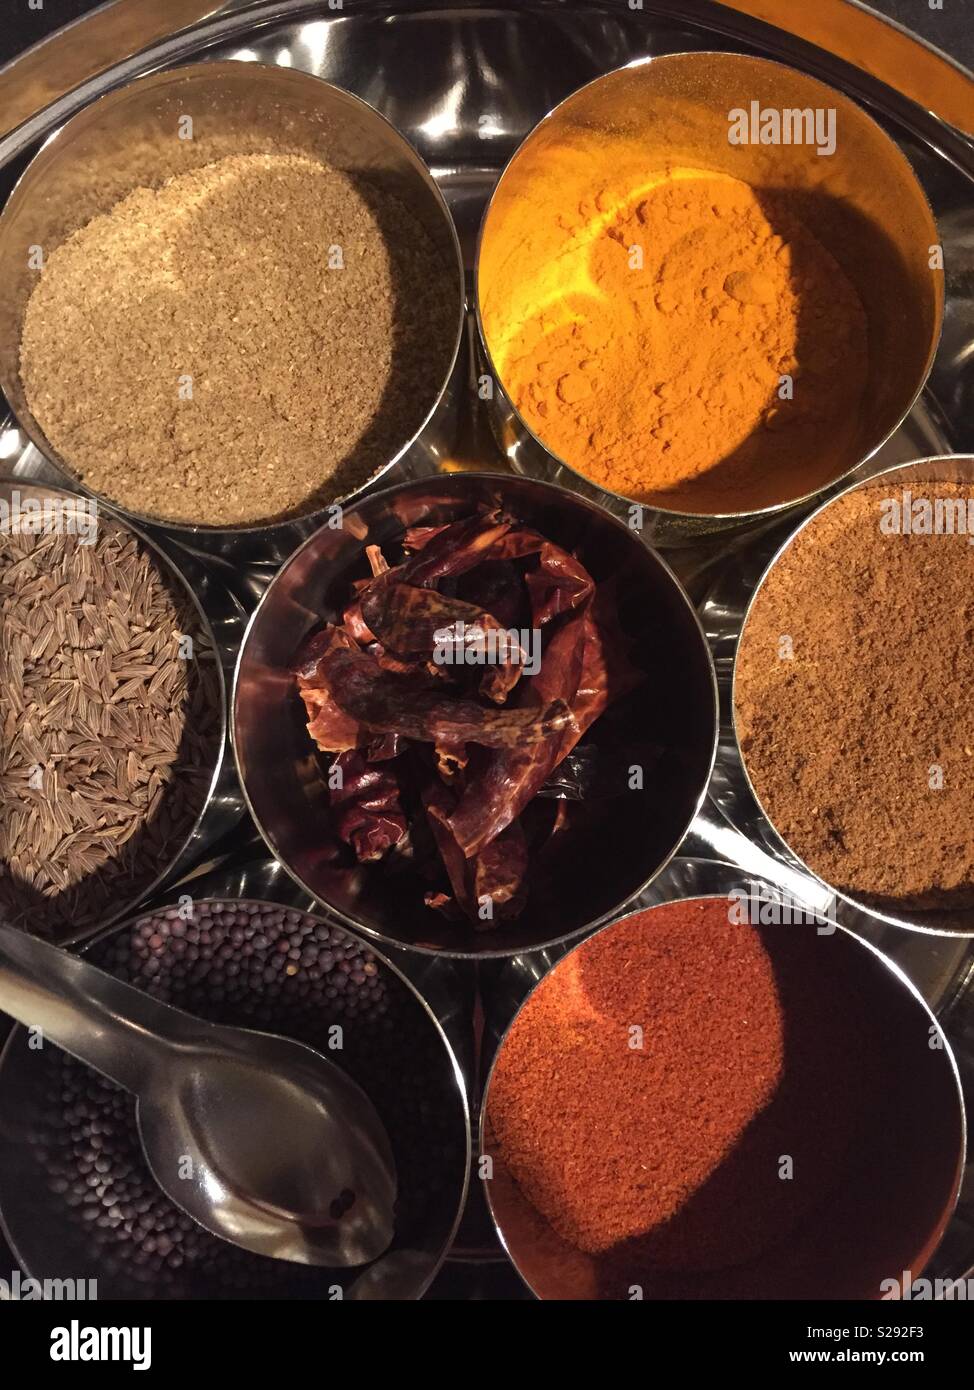 Indian cooking spices Stock Photo